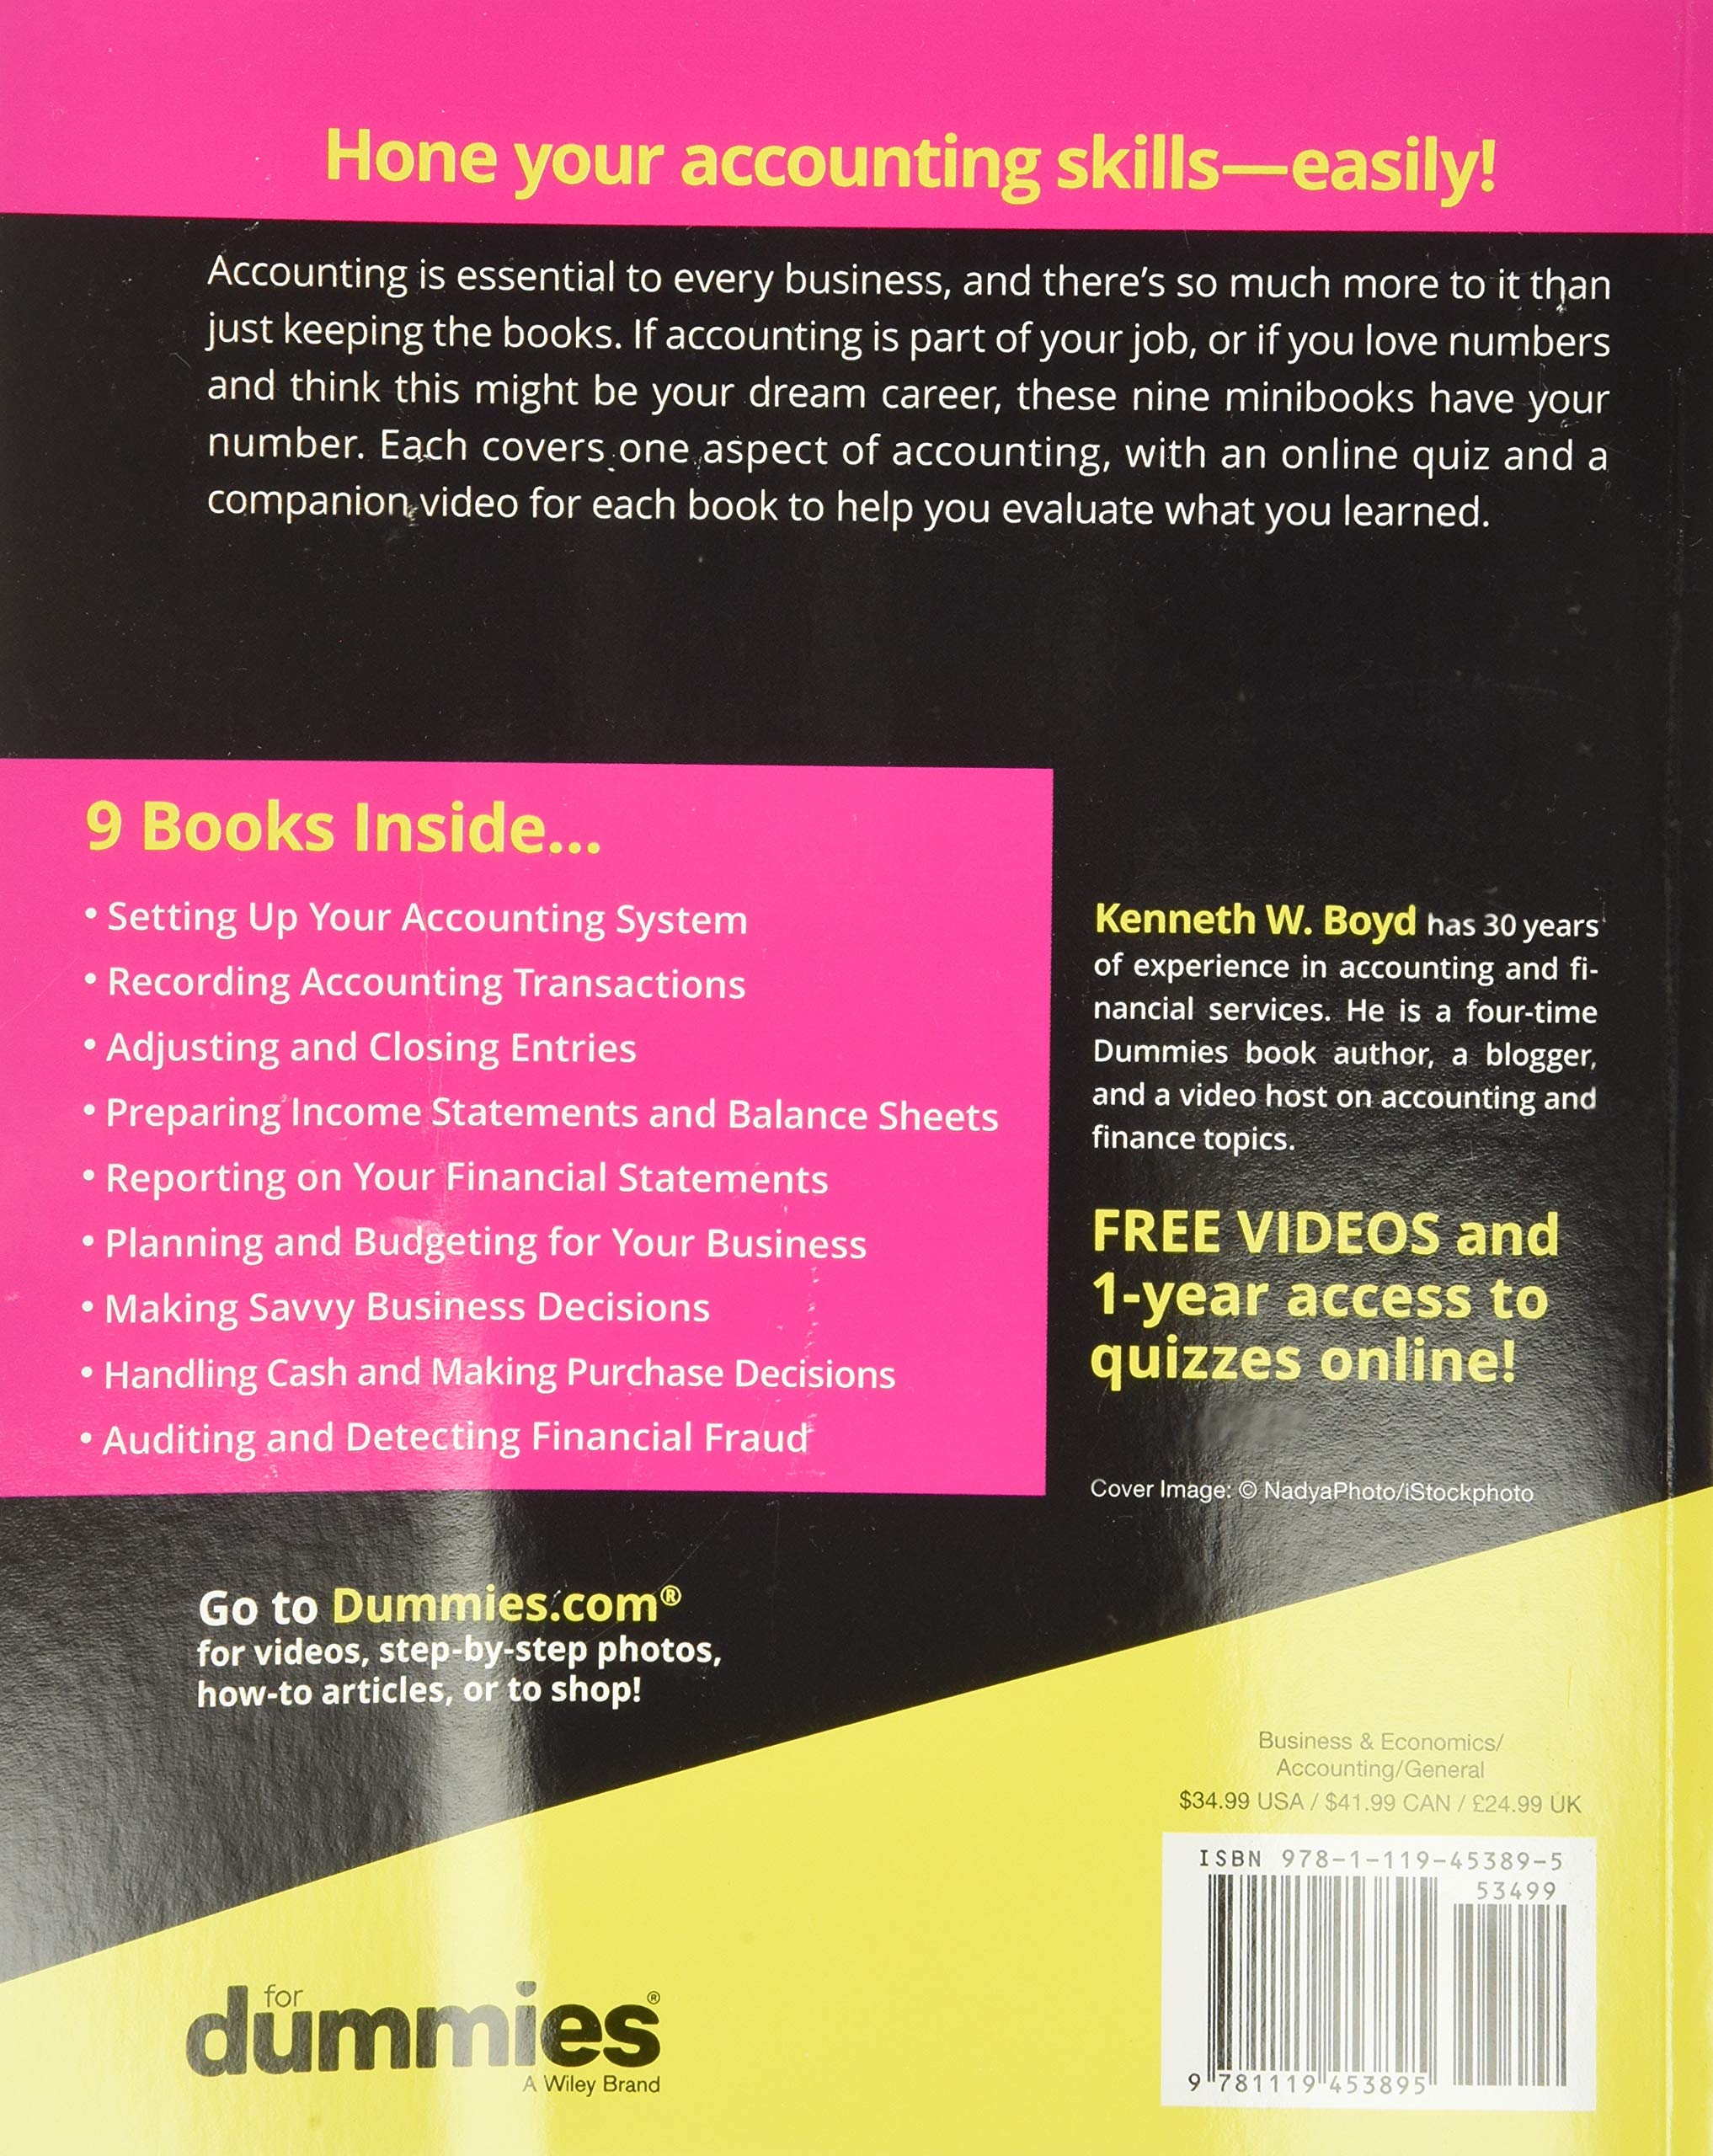 Accounting All-in-One For Dummies with Online Practice (For Dummies (Business & Personal Finance))